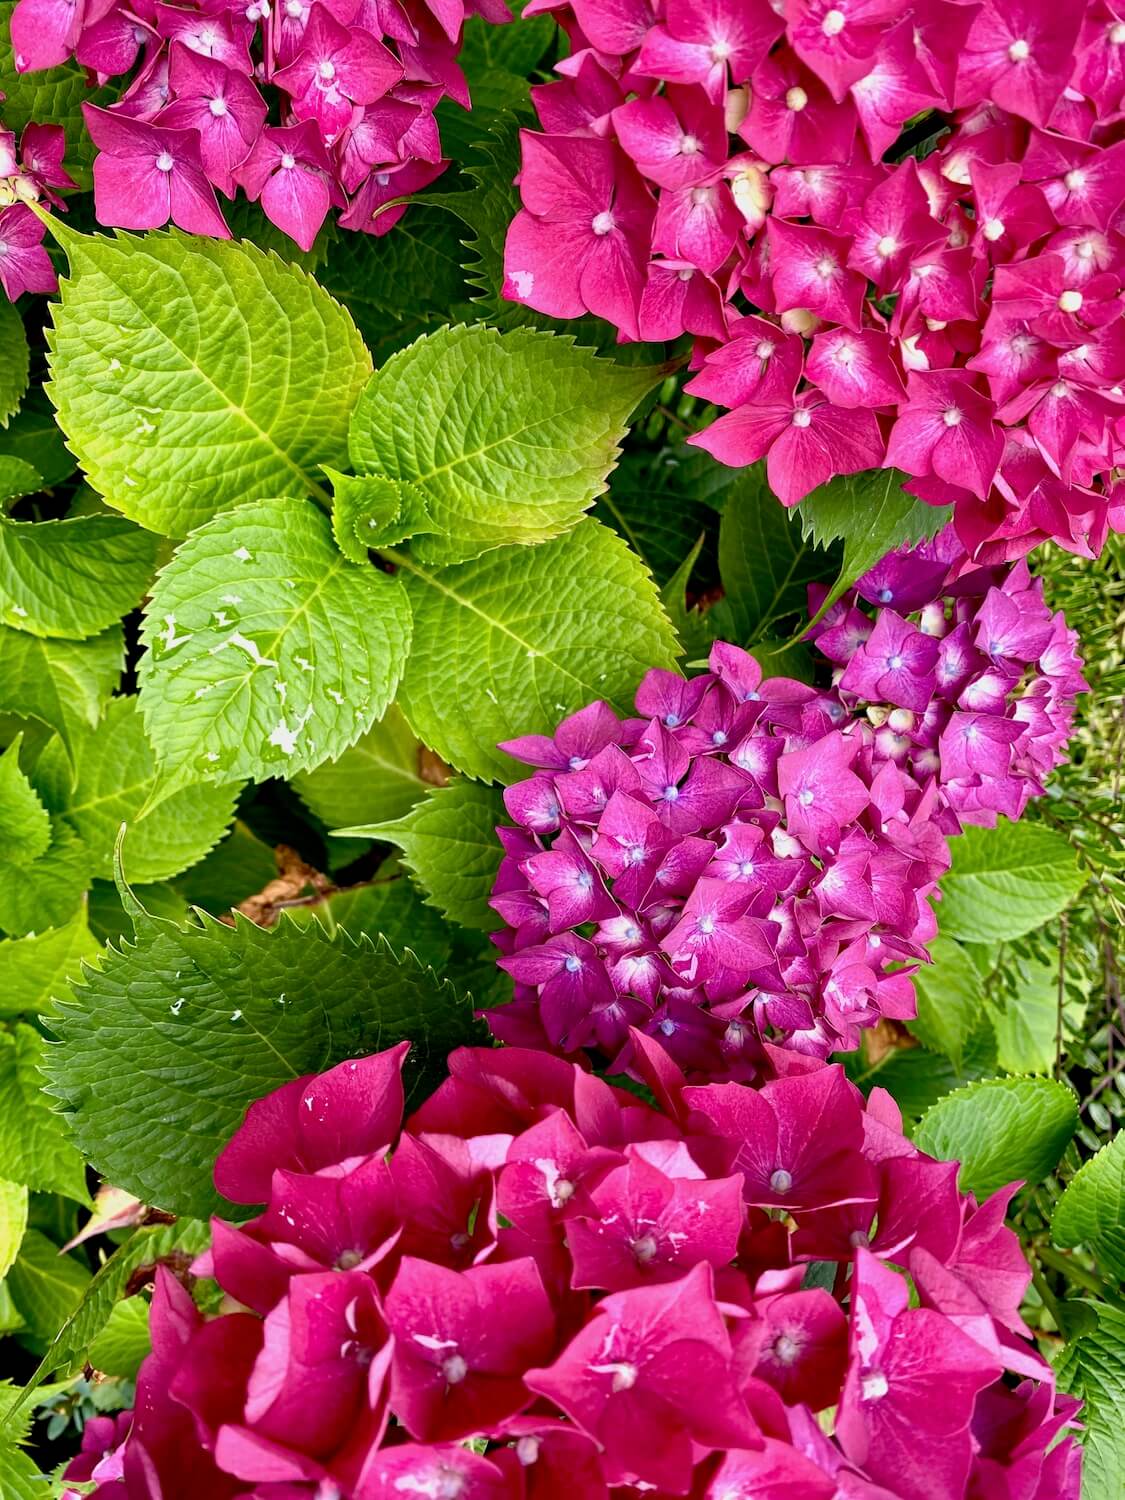 Beautiful hydrangea in bloom with bright purple blossoms in contrast to the lime green leaves with several droplets of water on them.